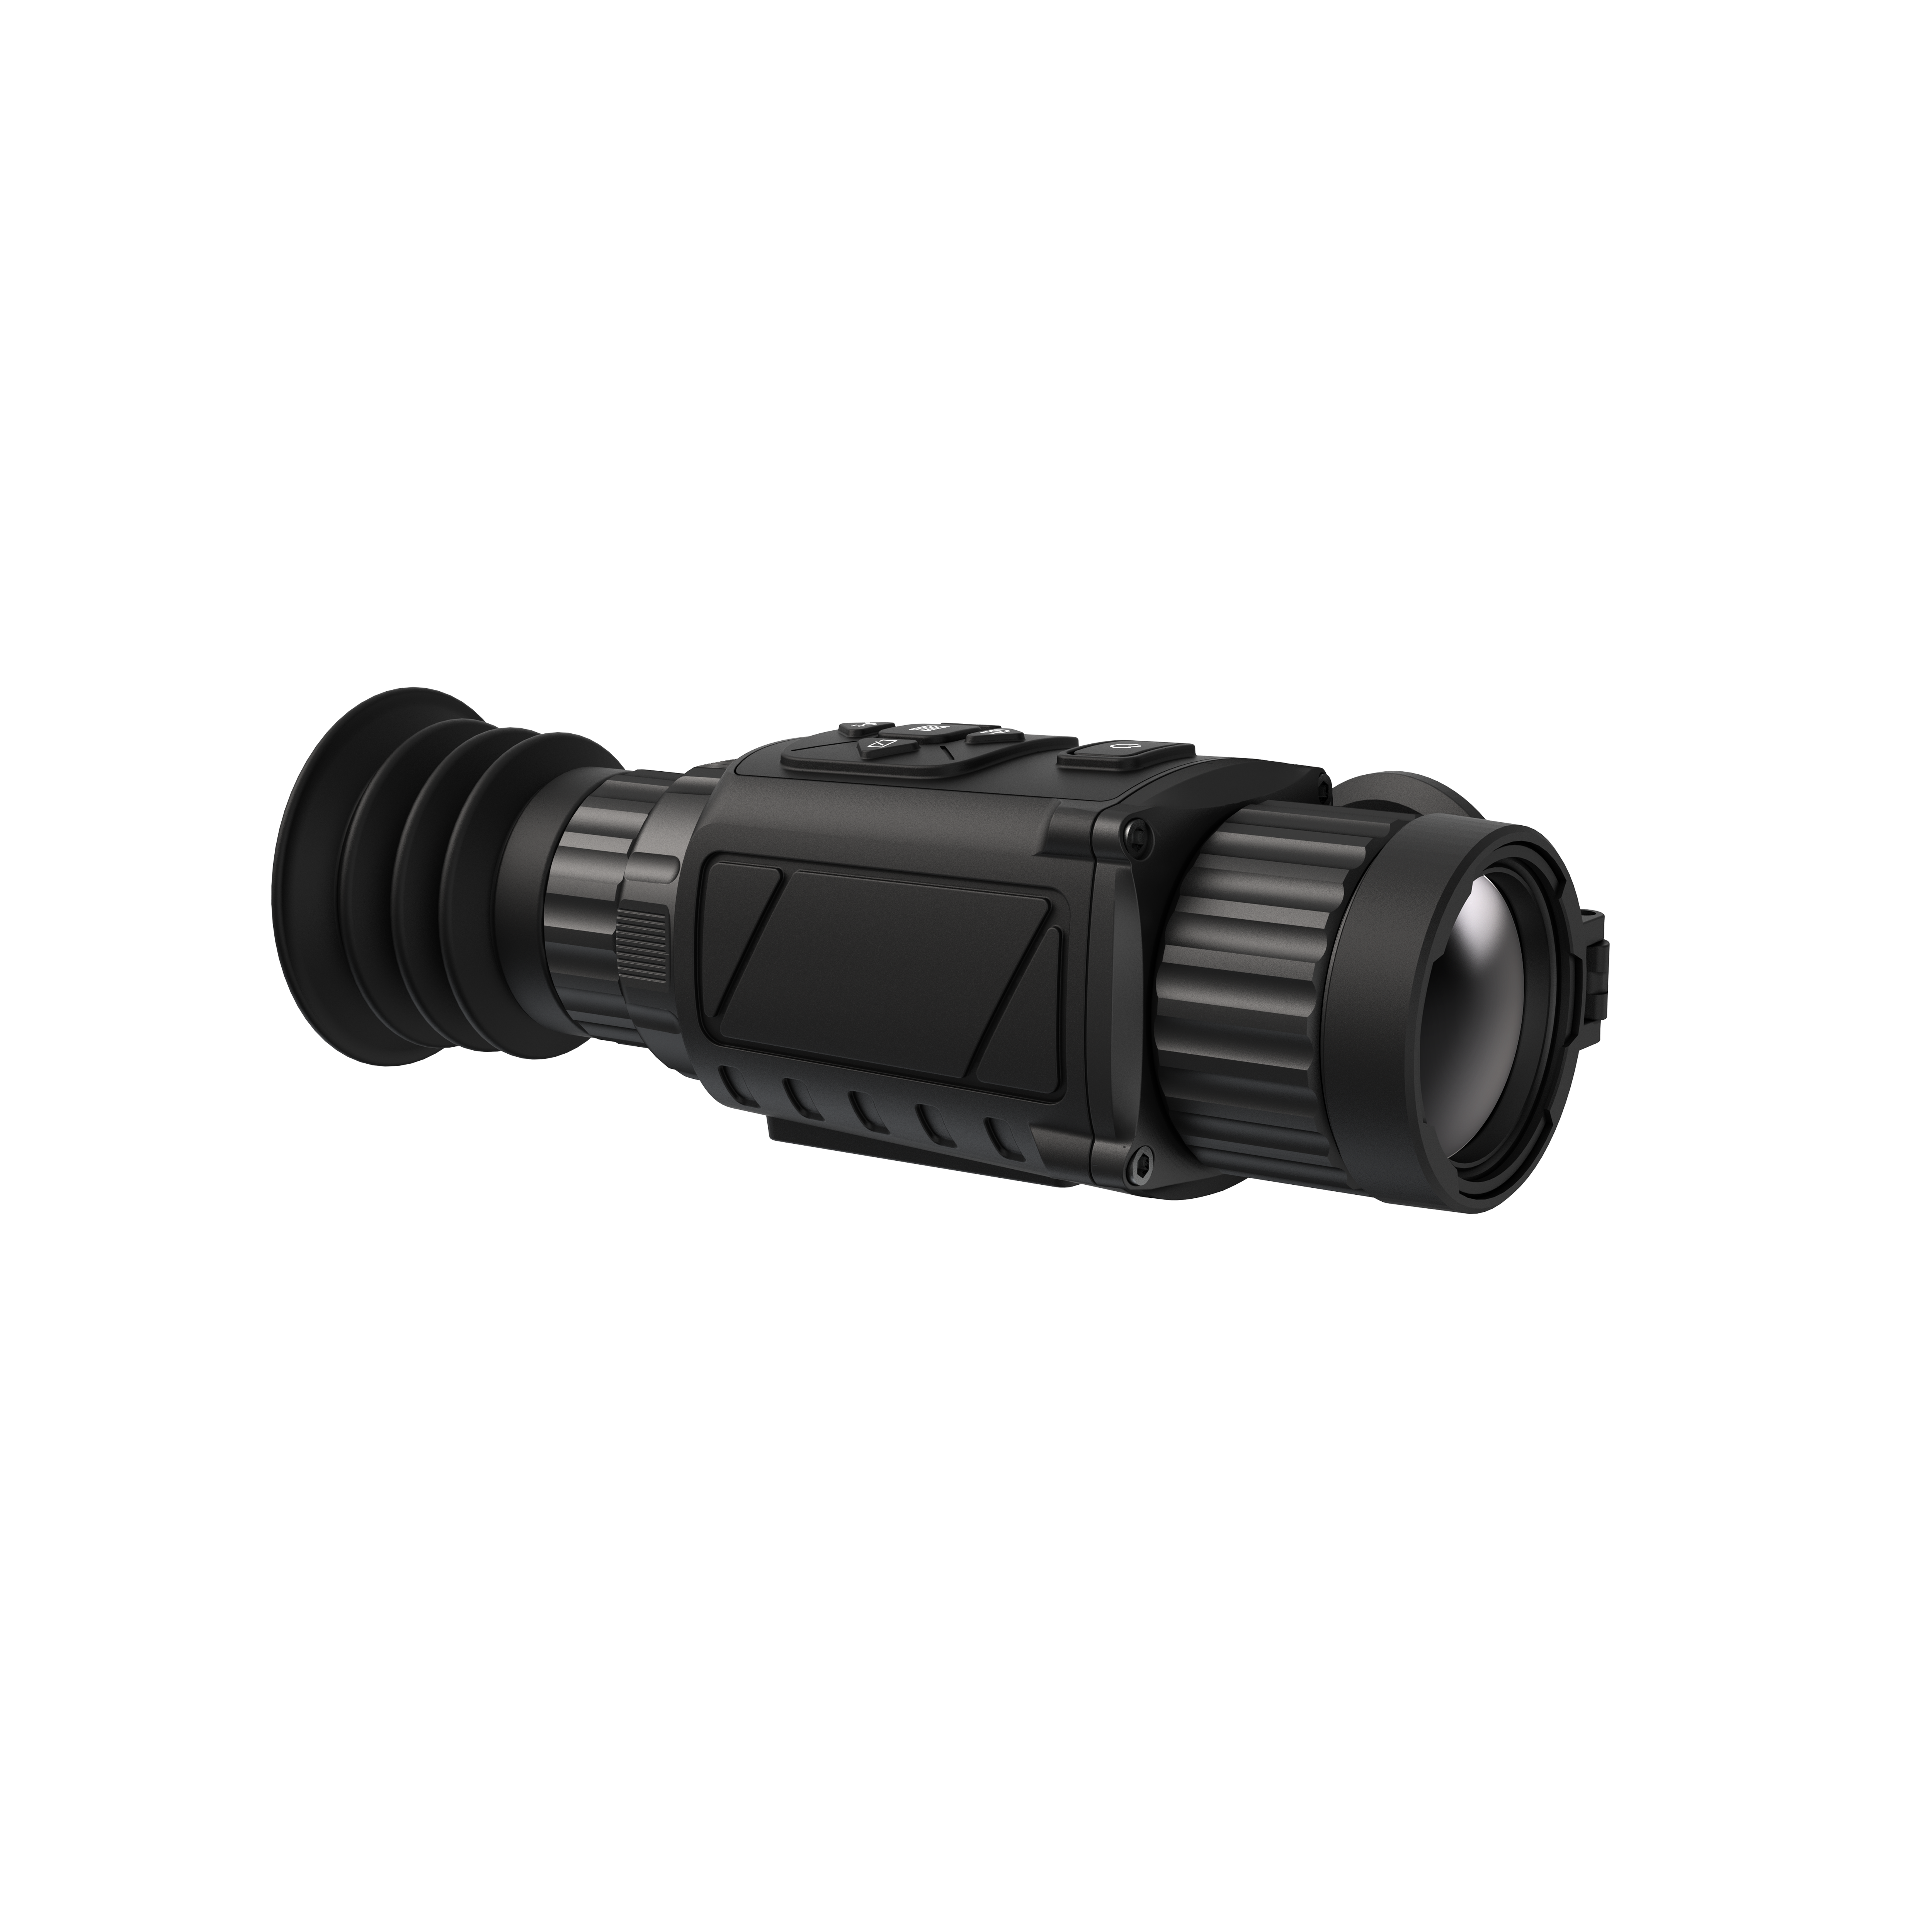 HIKMICRO Thunder TH25/TH35 Thermal Scope